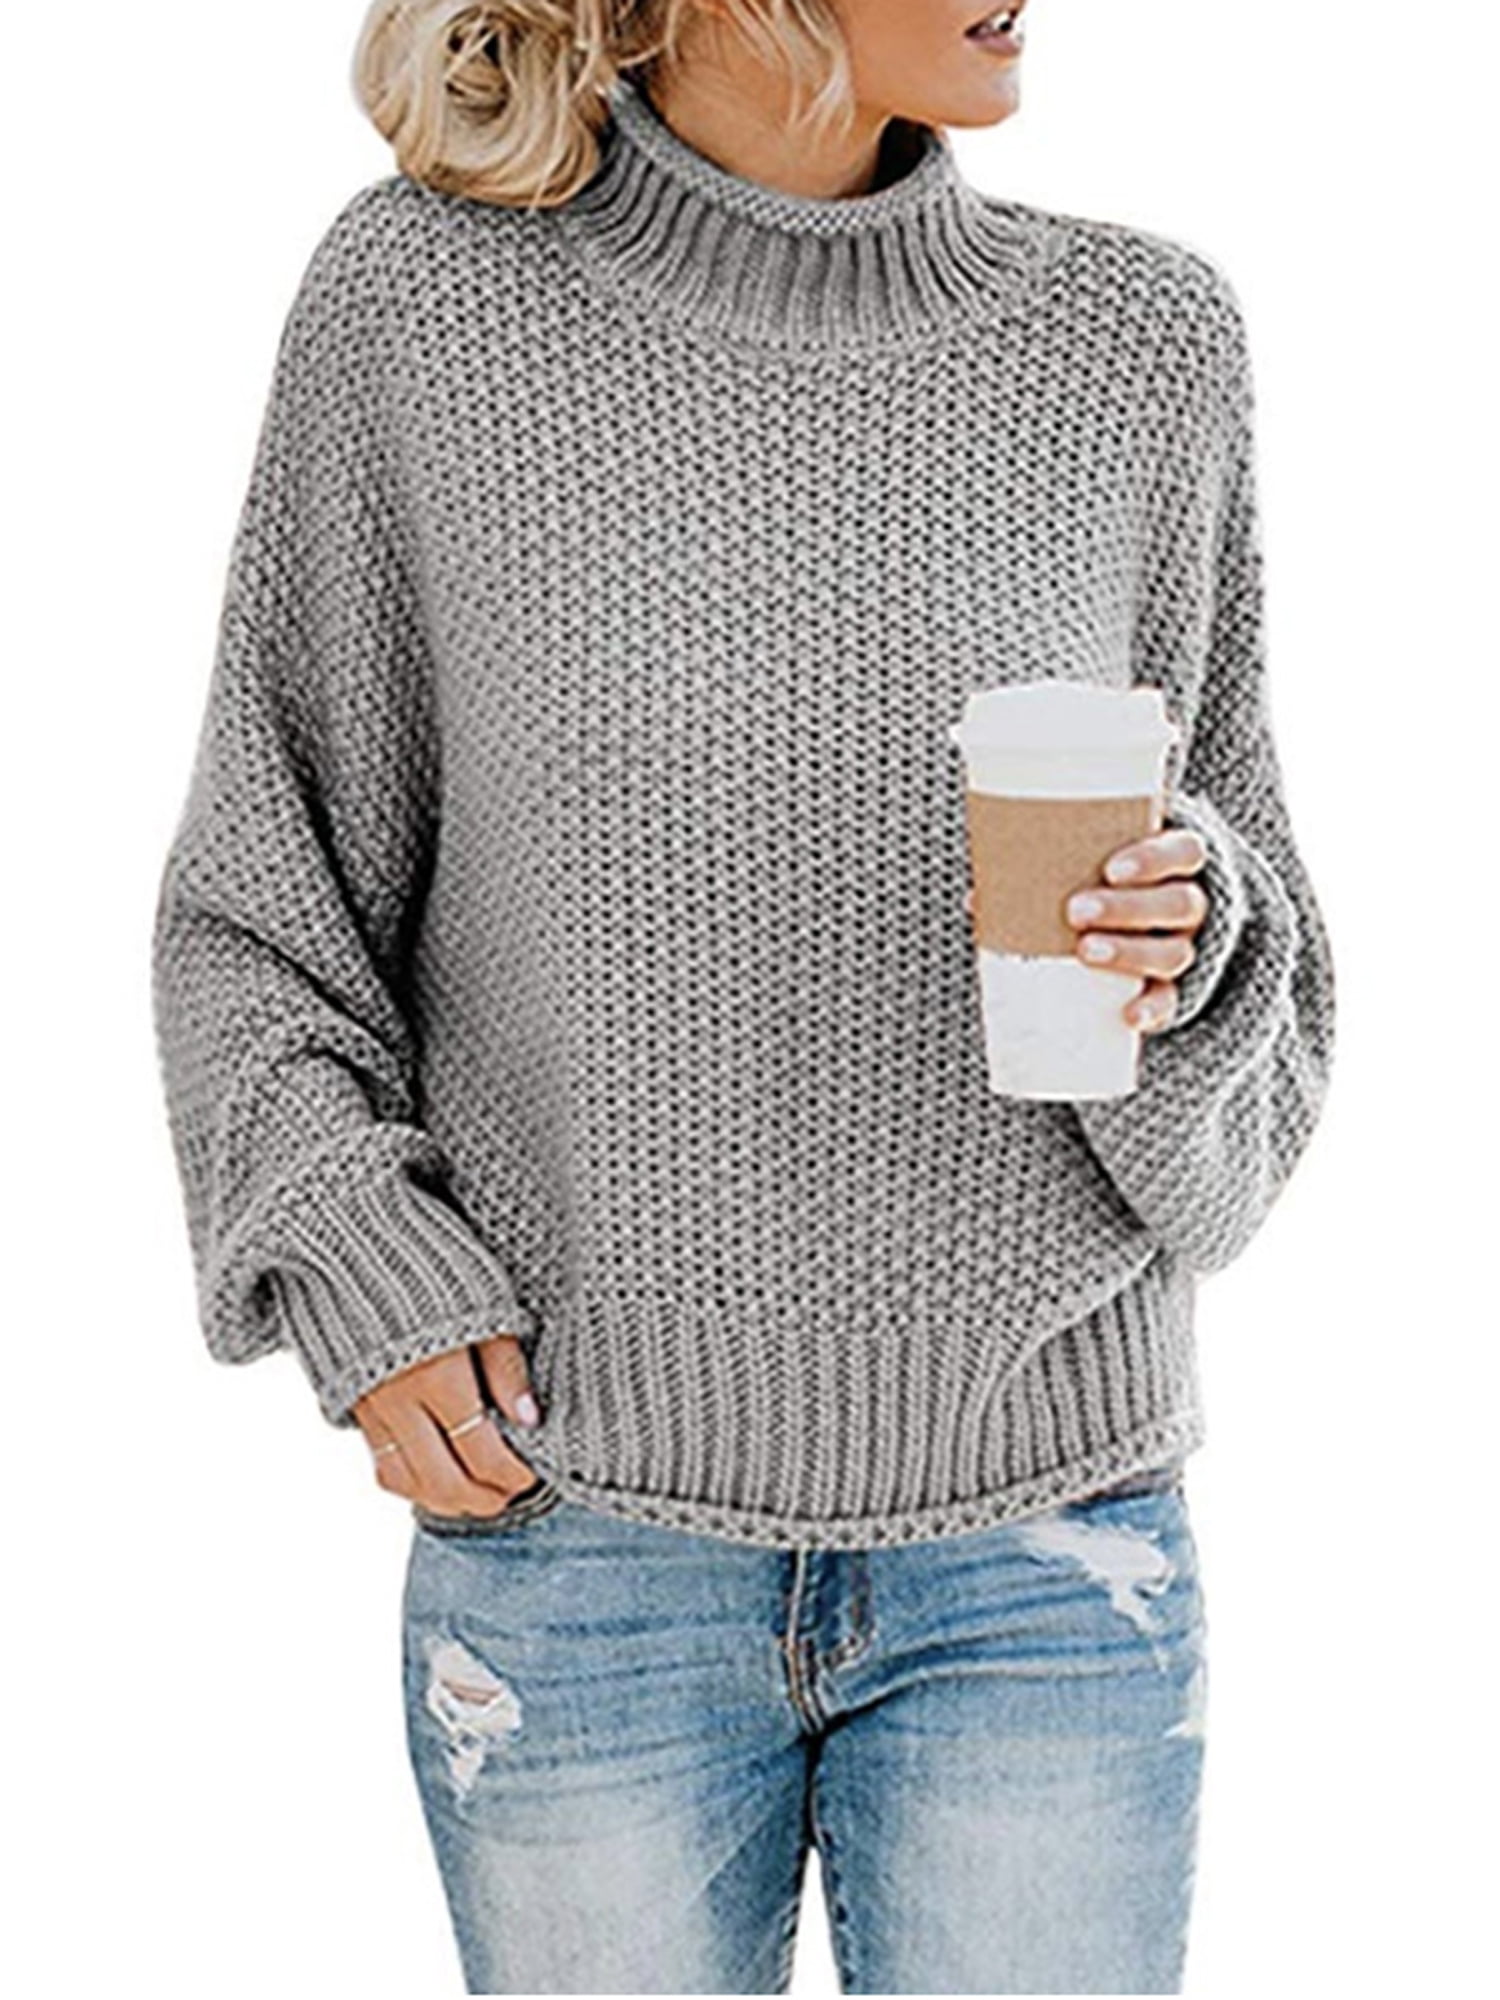 AILMY Womens Sweaters Loose Casual Solid Soft Knitted O-Neck Long Sleeve Lazy Winter Pullovers 